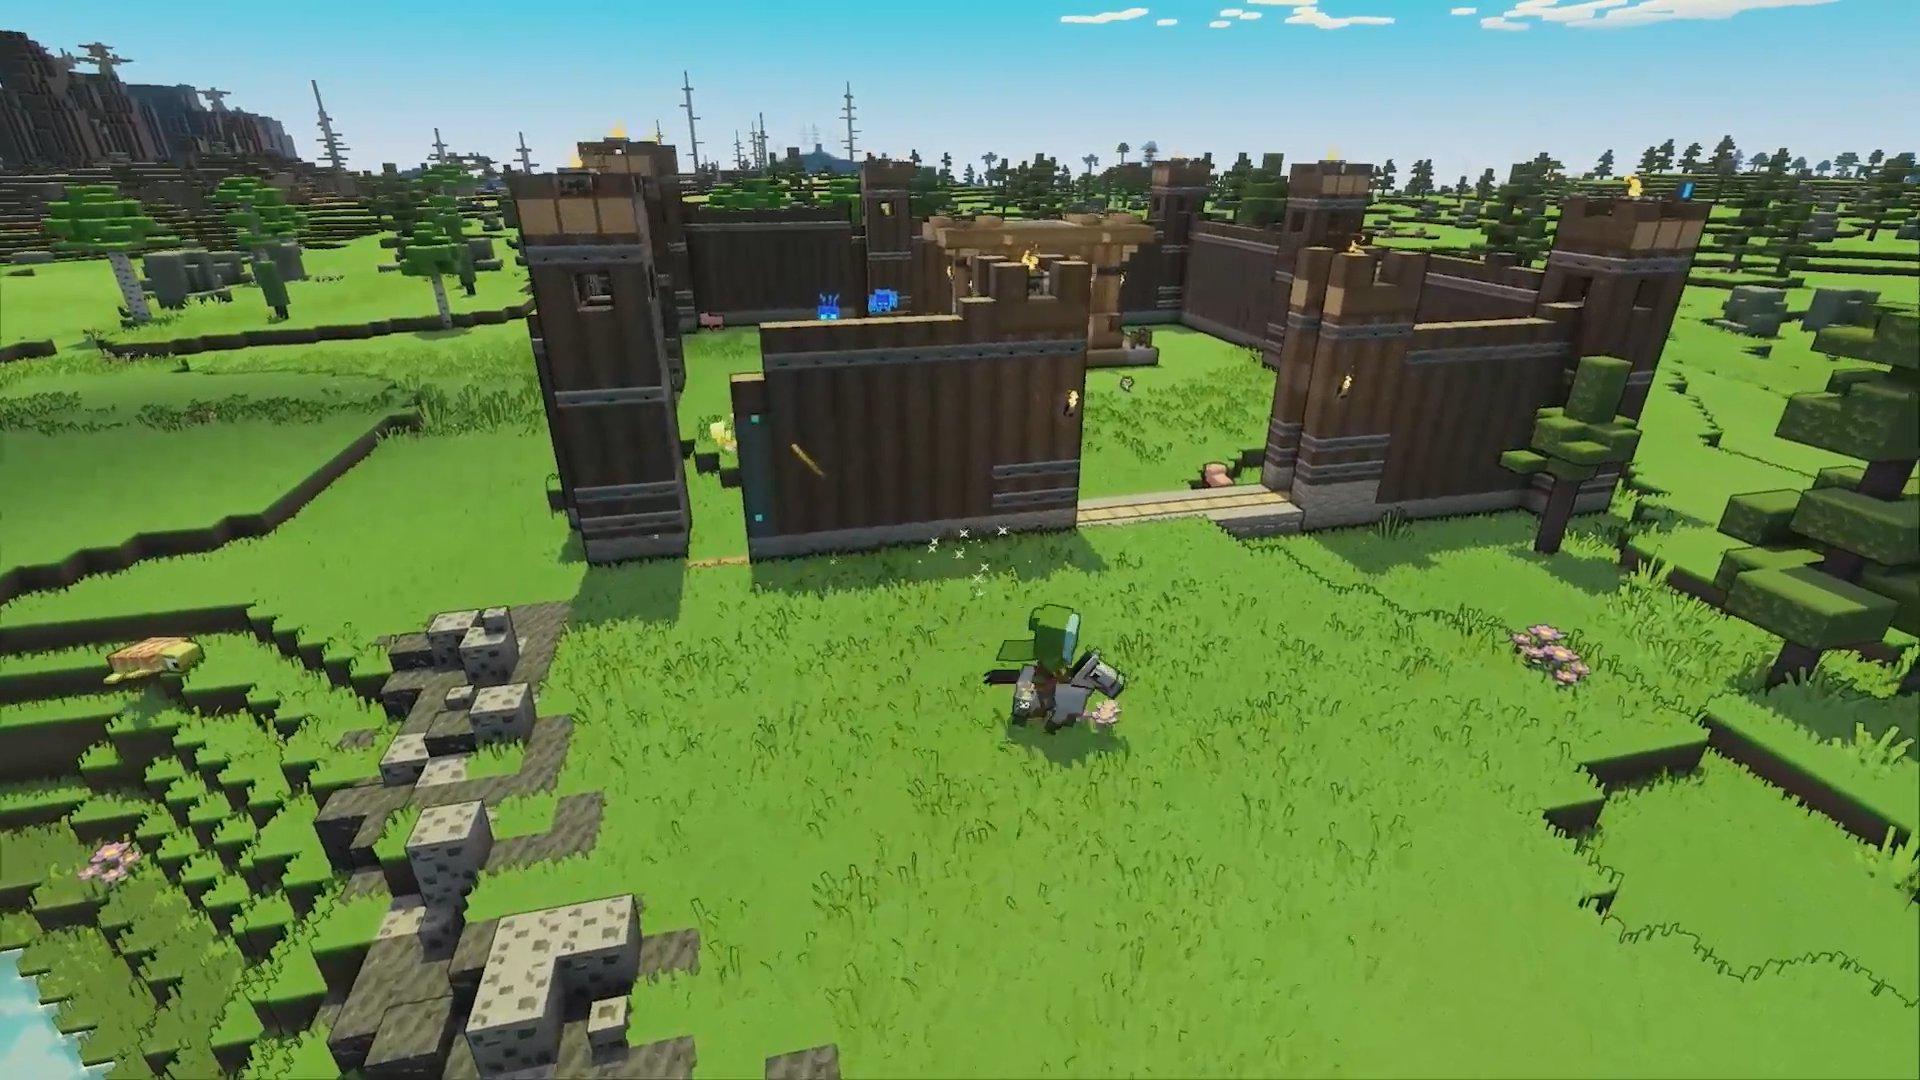 Minecraft Legends release date, Trailer & news on RTS game